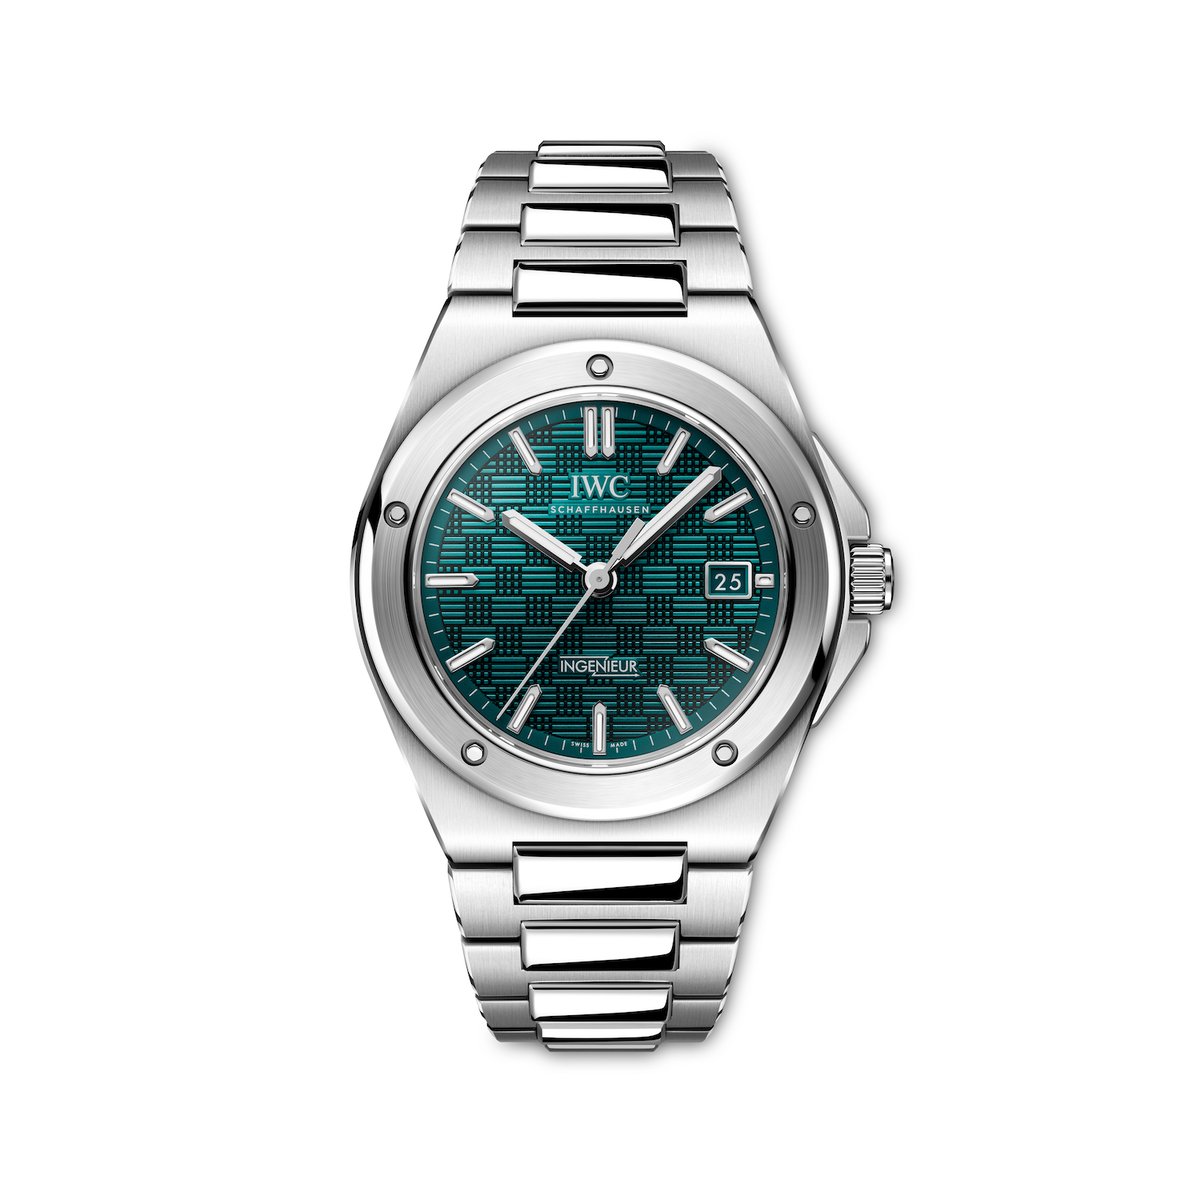 IWC Ingenieur 40 collection